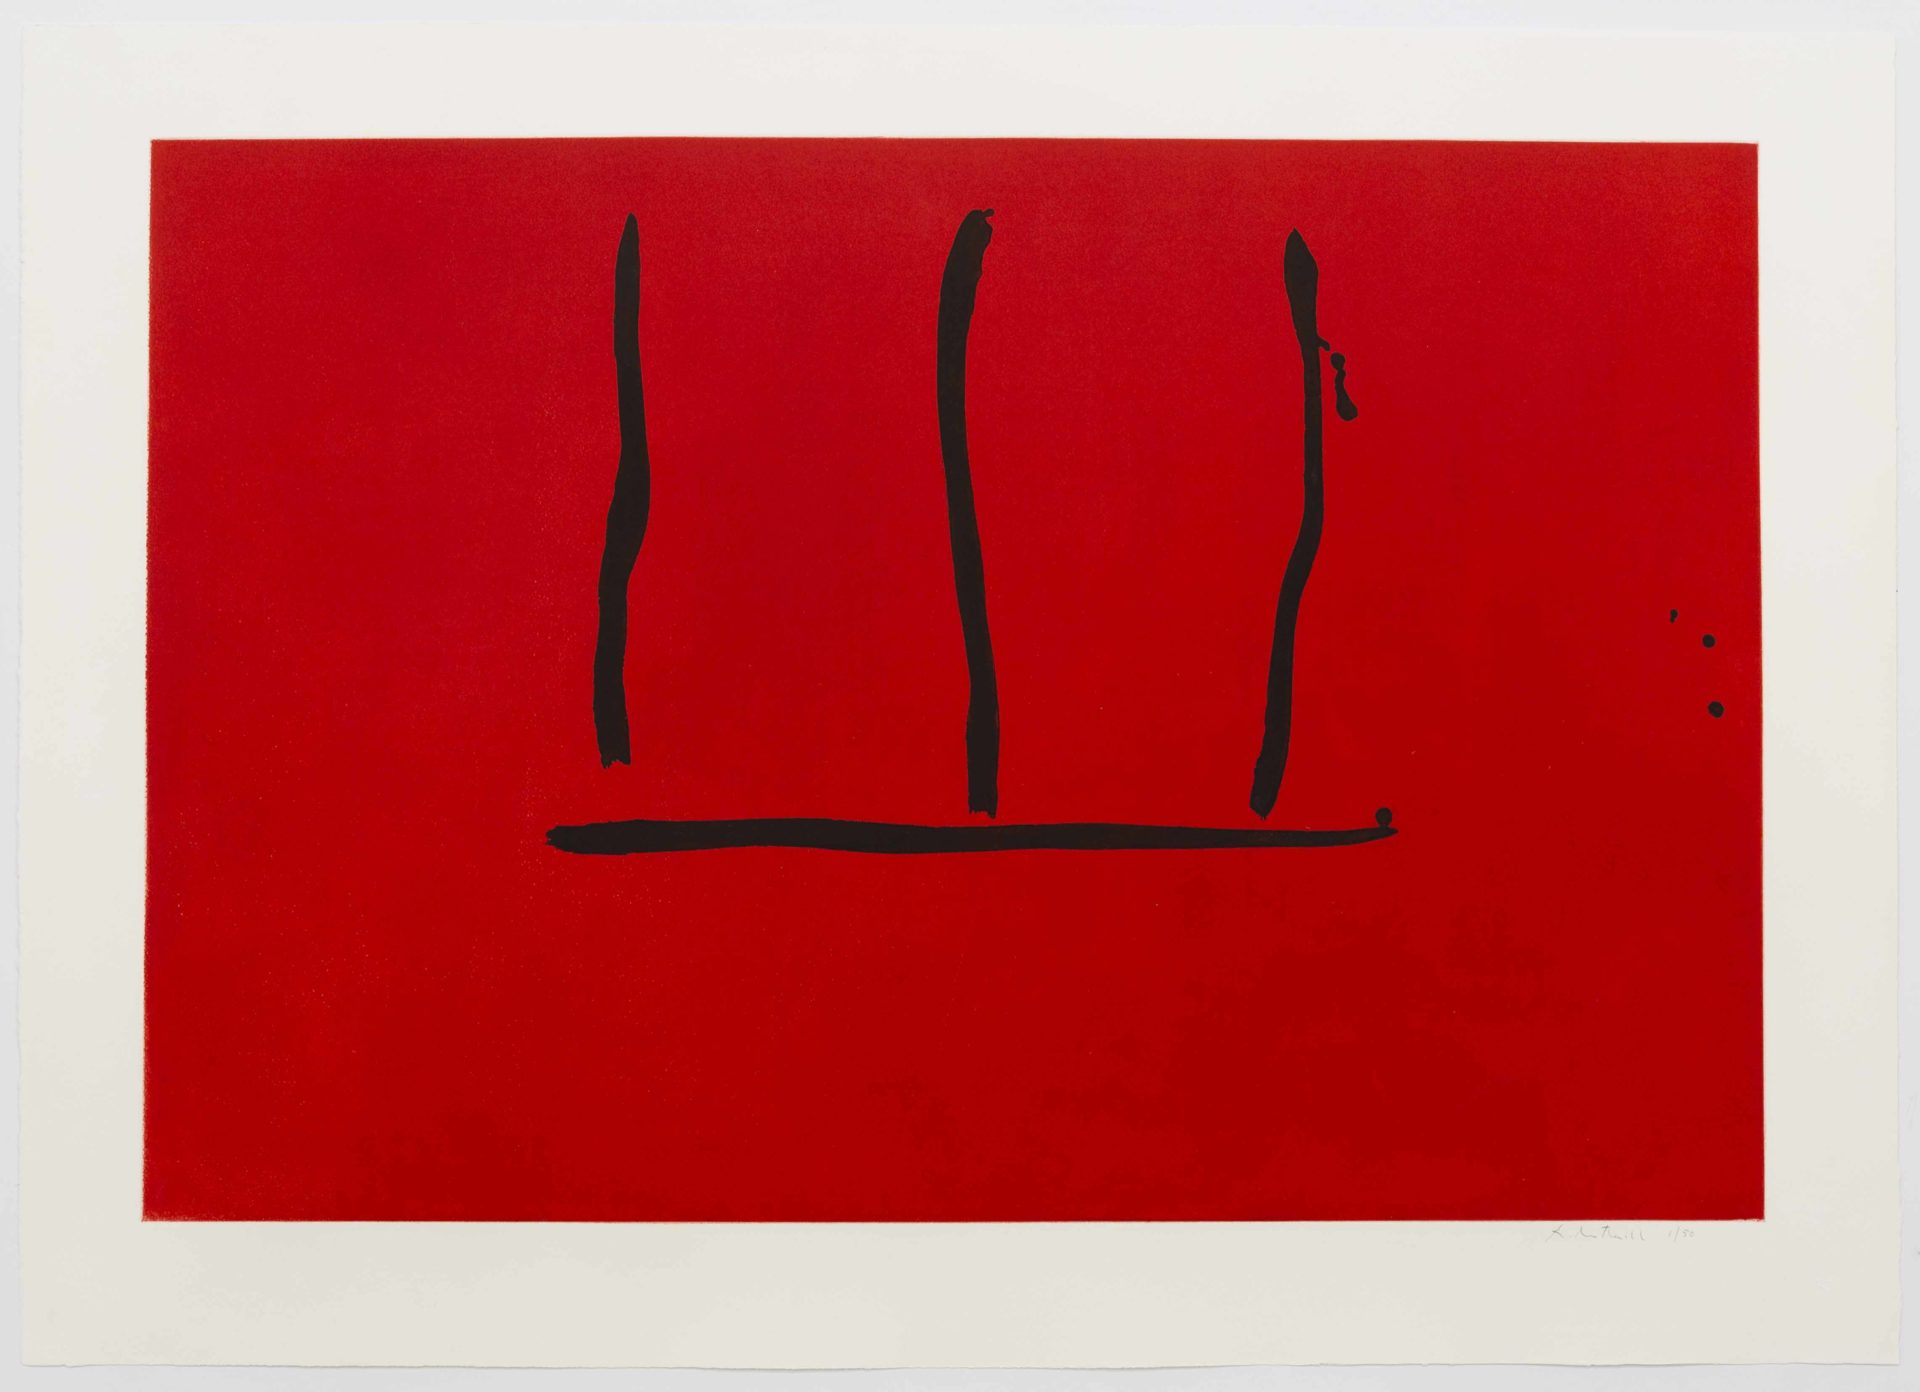 Robert Motherwell Untitled (E. & B. 135), 1972-73 Aquatint and lift-ground etching 29 1/2 x 41 1/4 inches (74.9 x 104.8 cm) Edition of 50